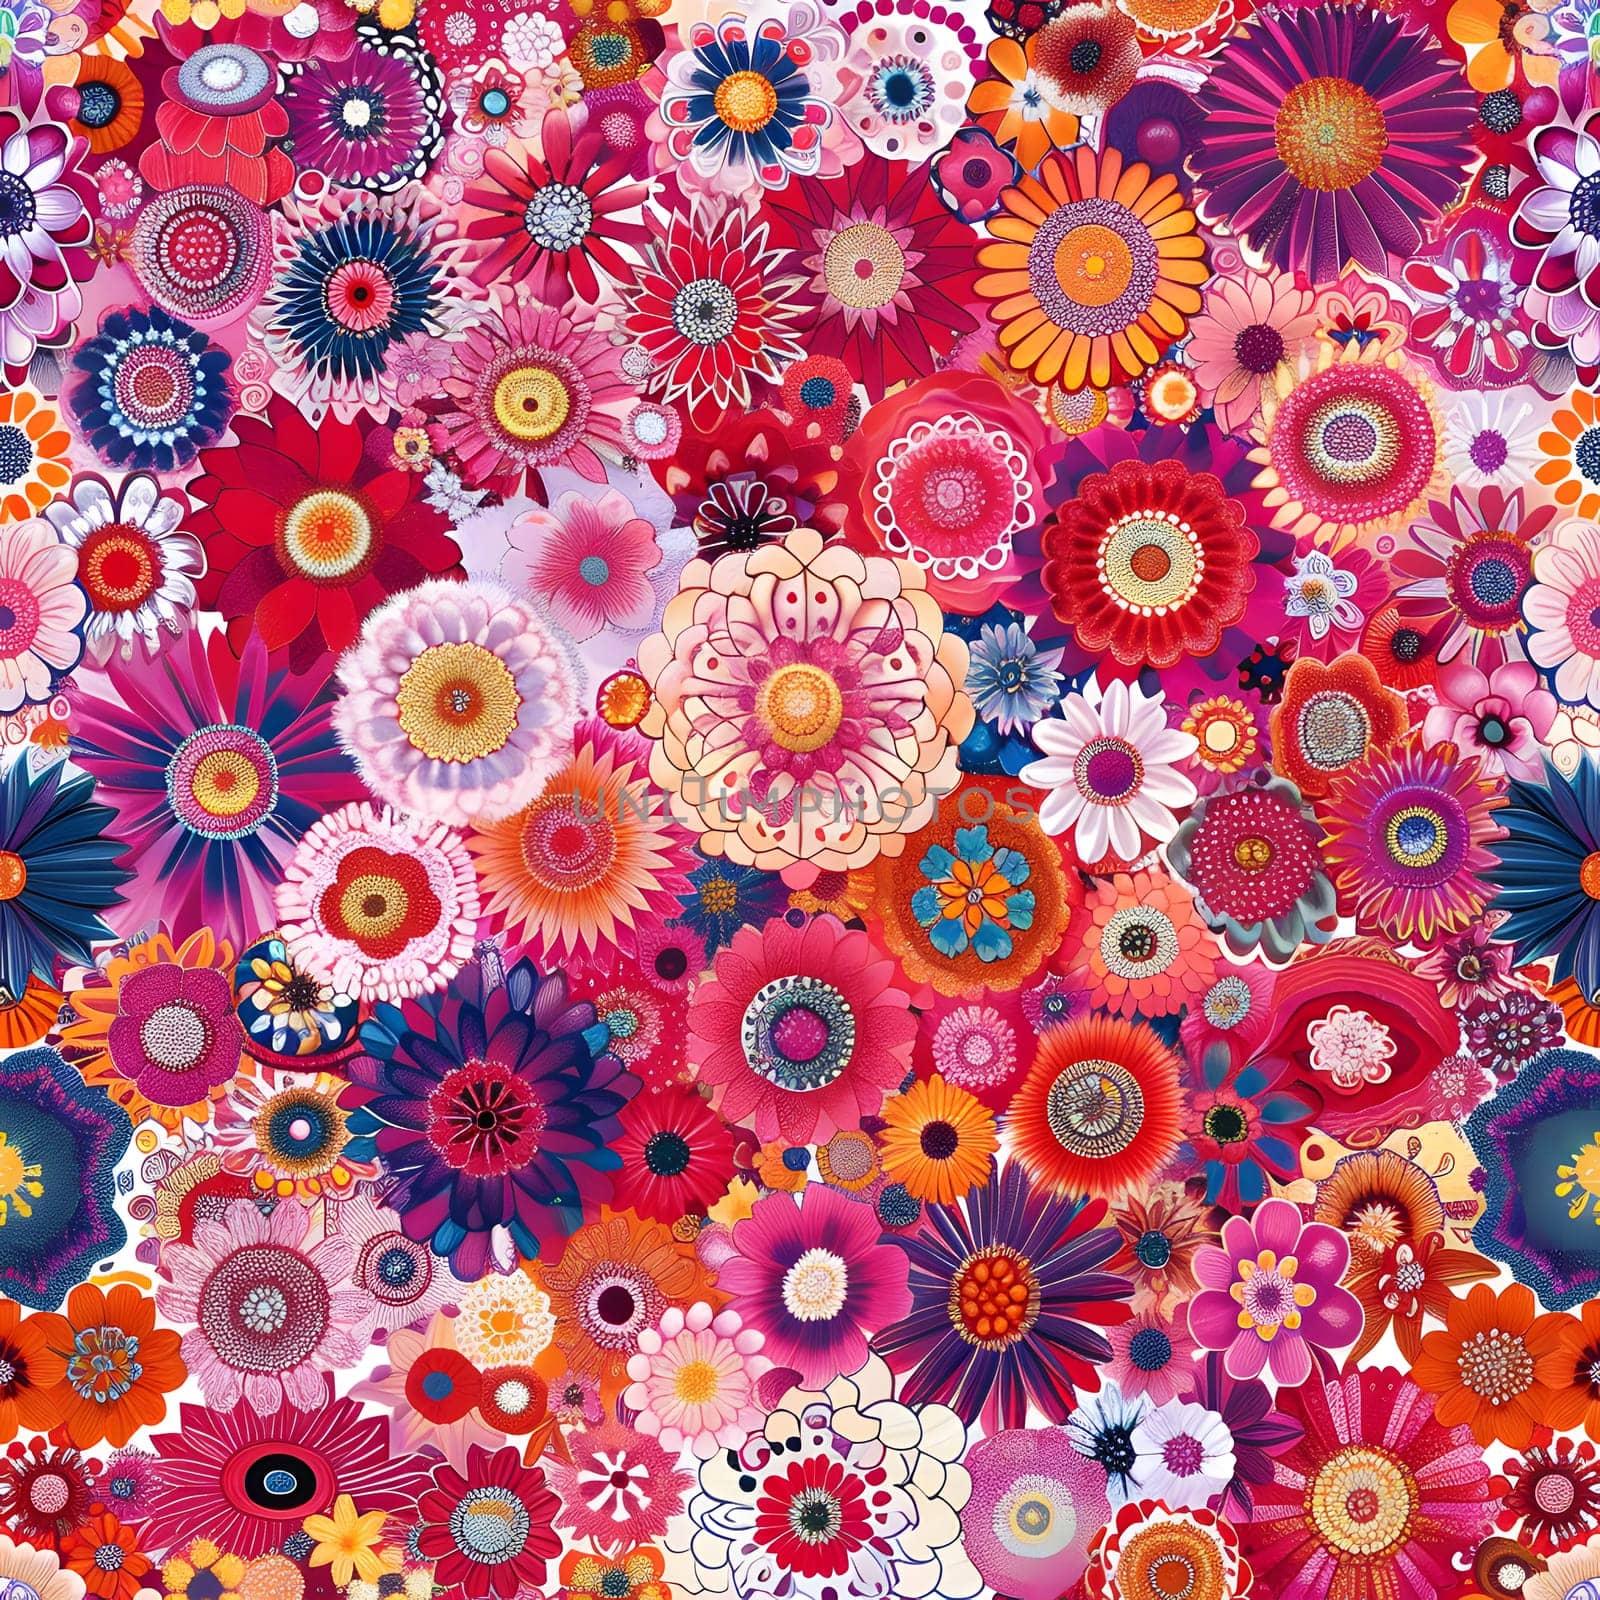 A creative arts piece with a pattern of colorful flowers, including vibrant electric blue, magenta, and pink petals, set against a clean white background